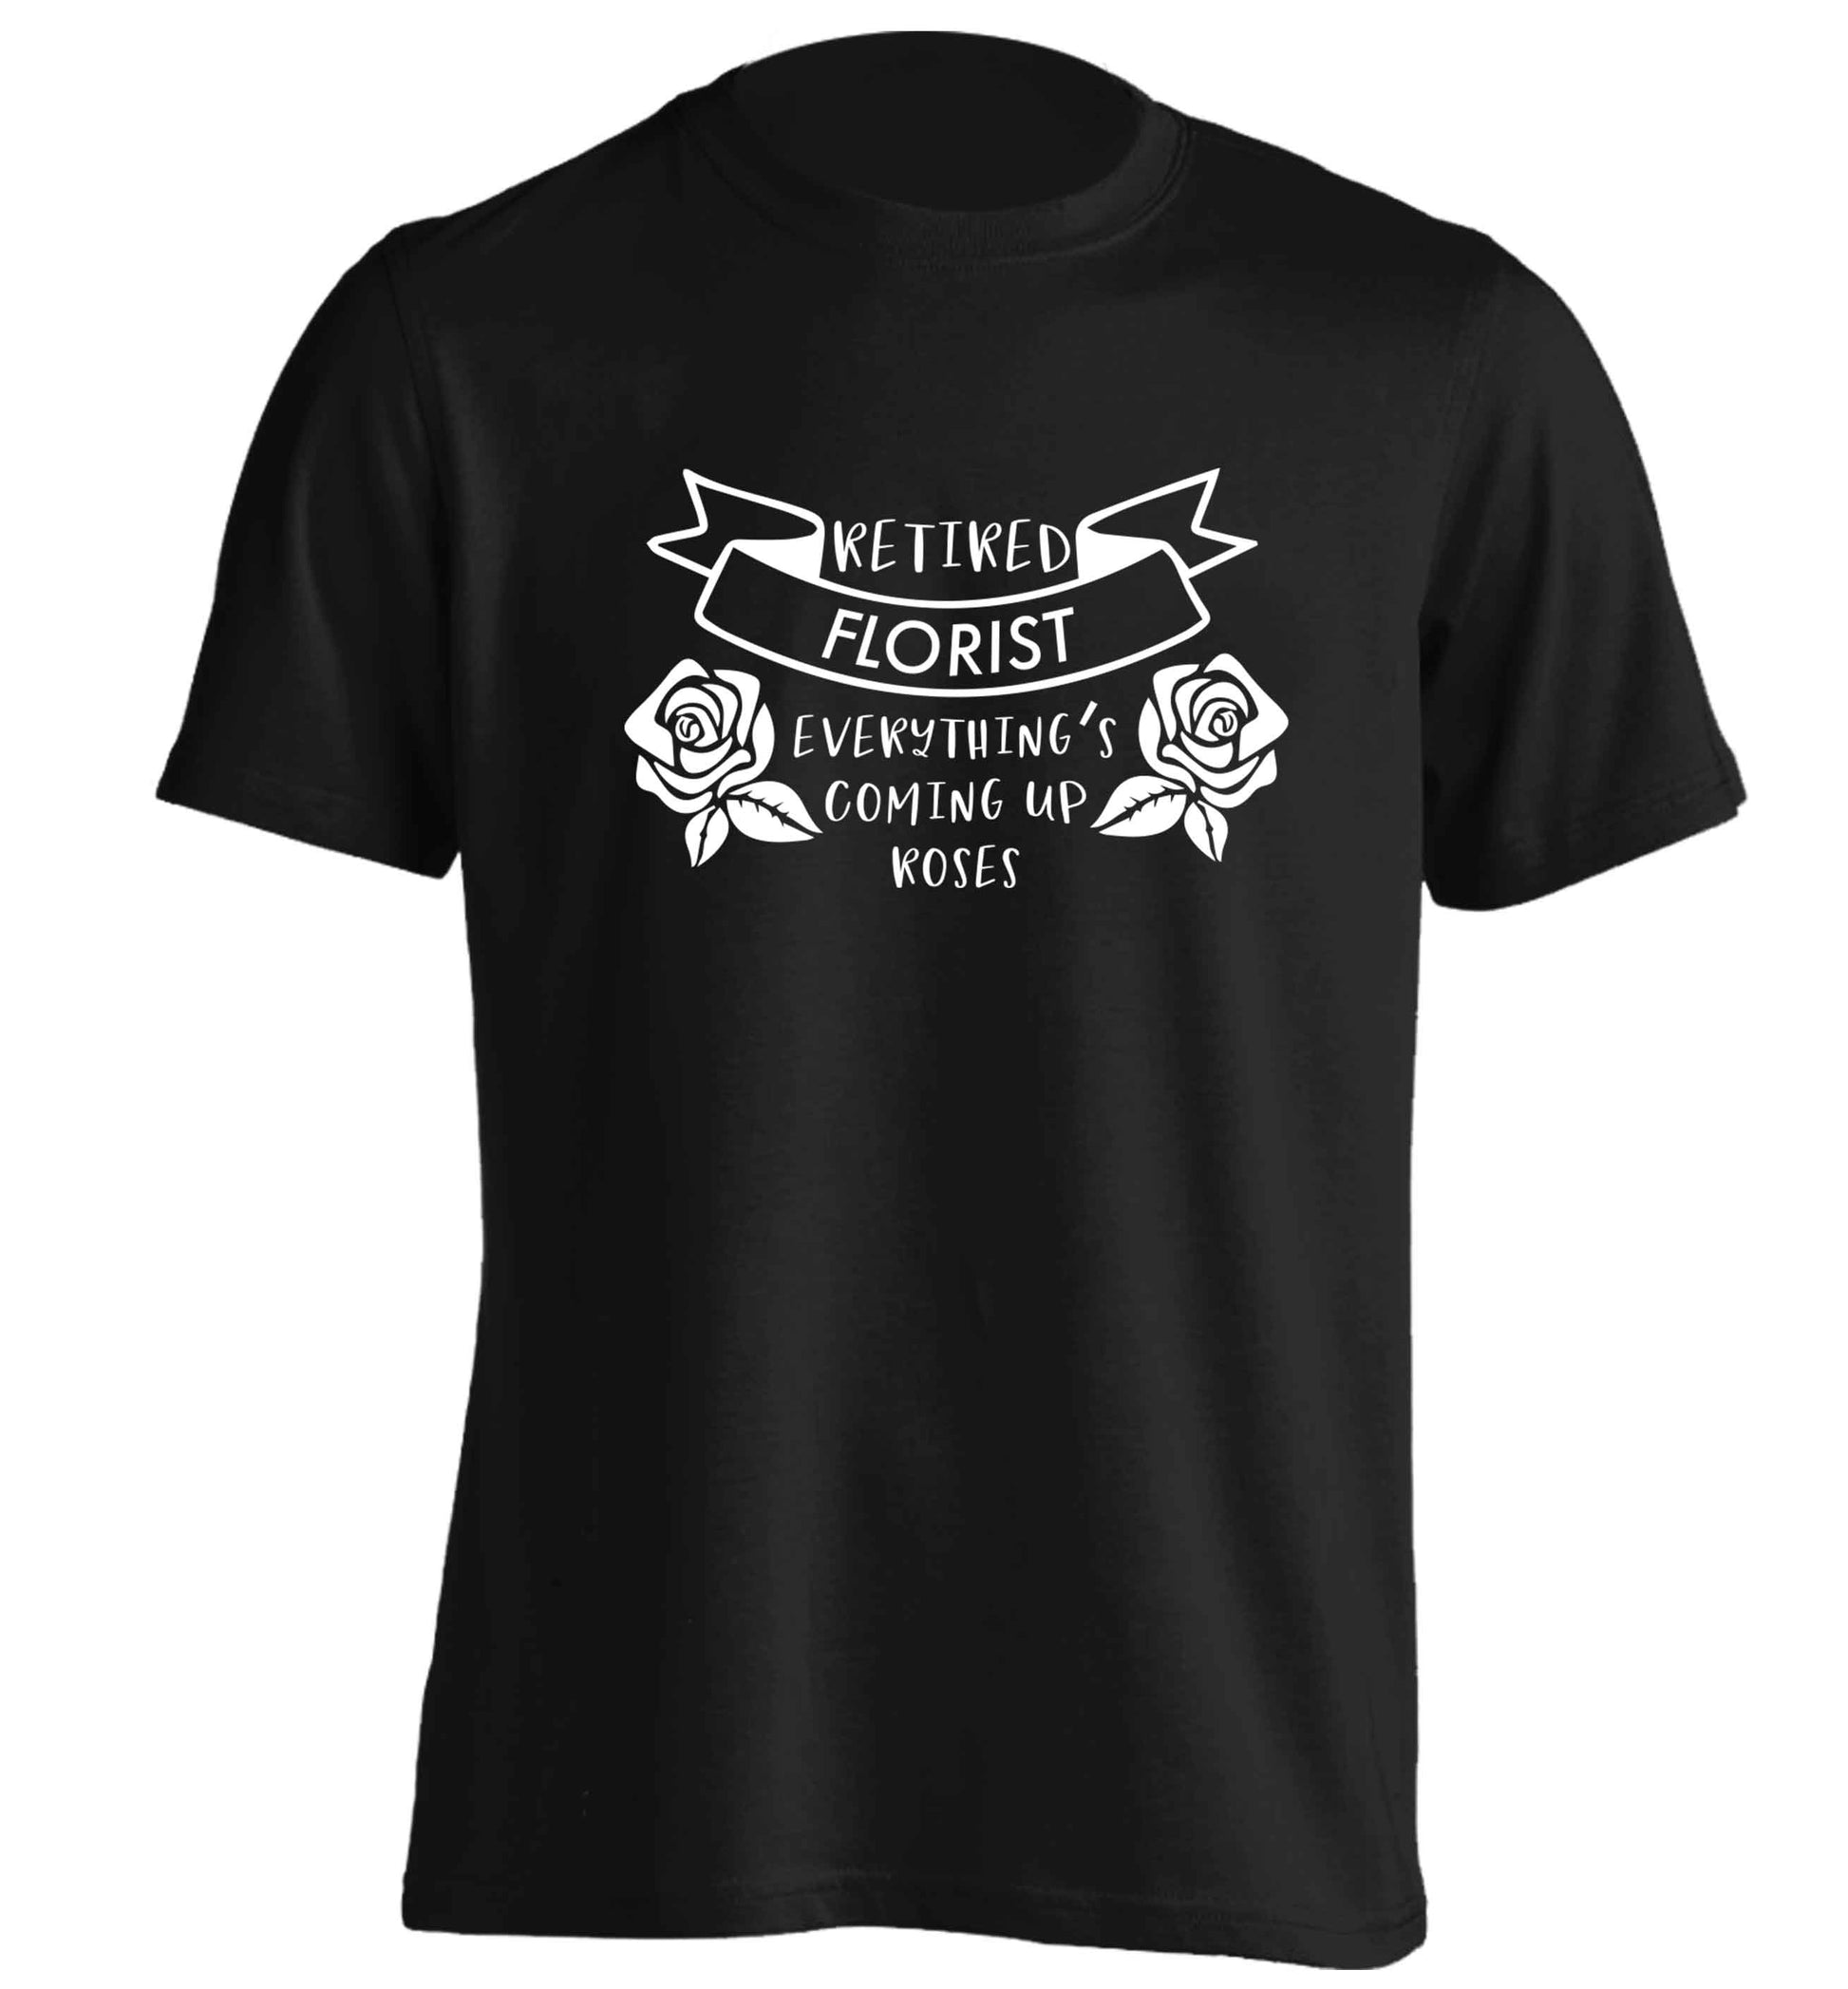 Retired florist everything's coming up roses adults unisex black Tshirt 2XL